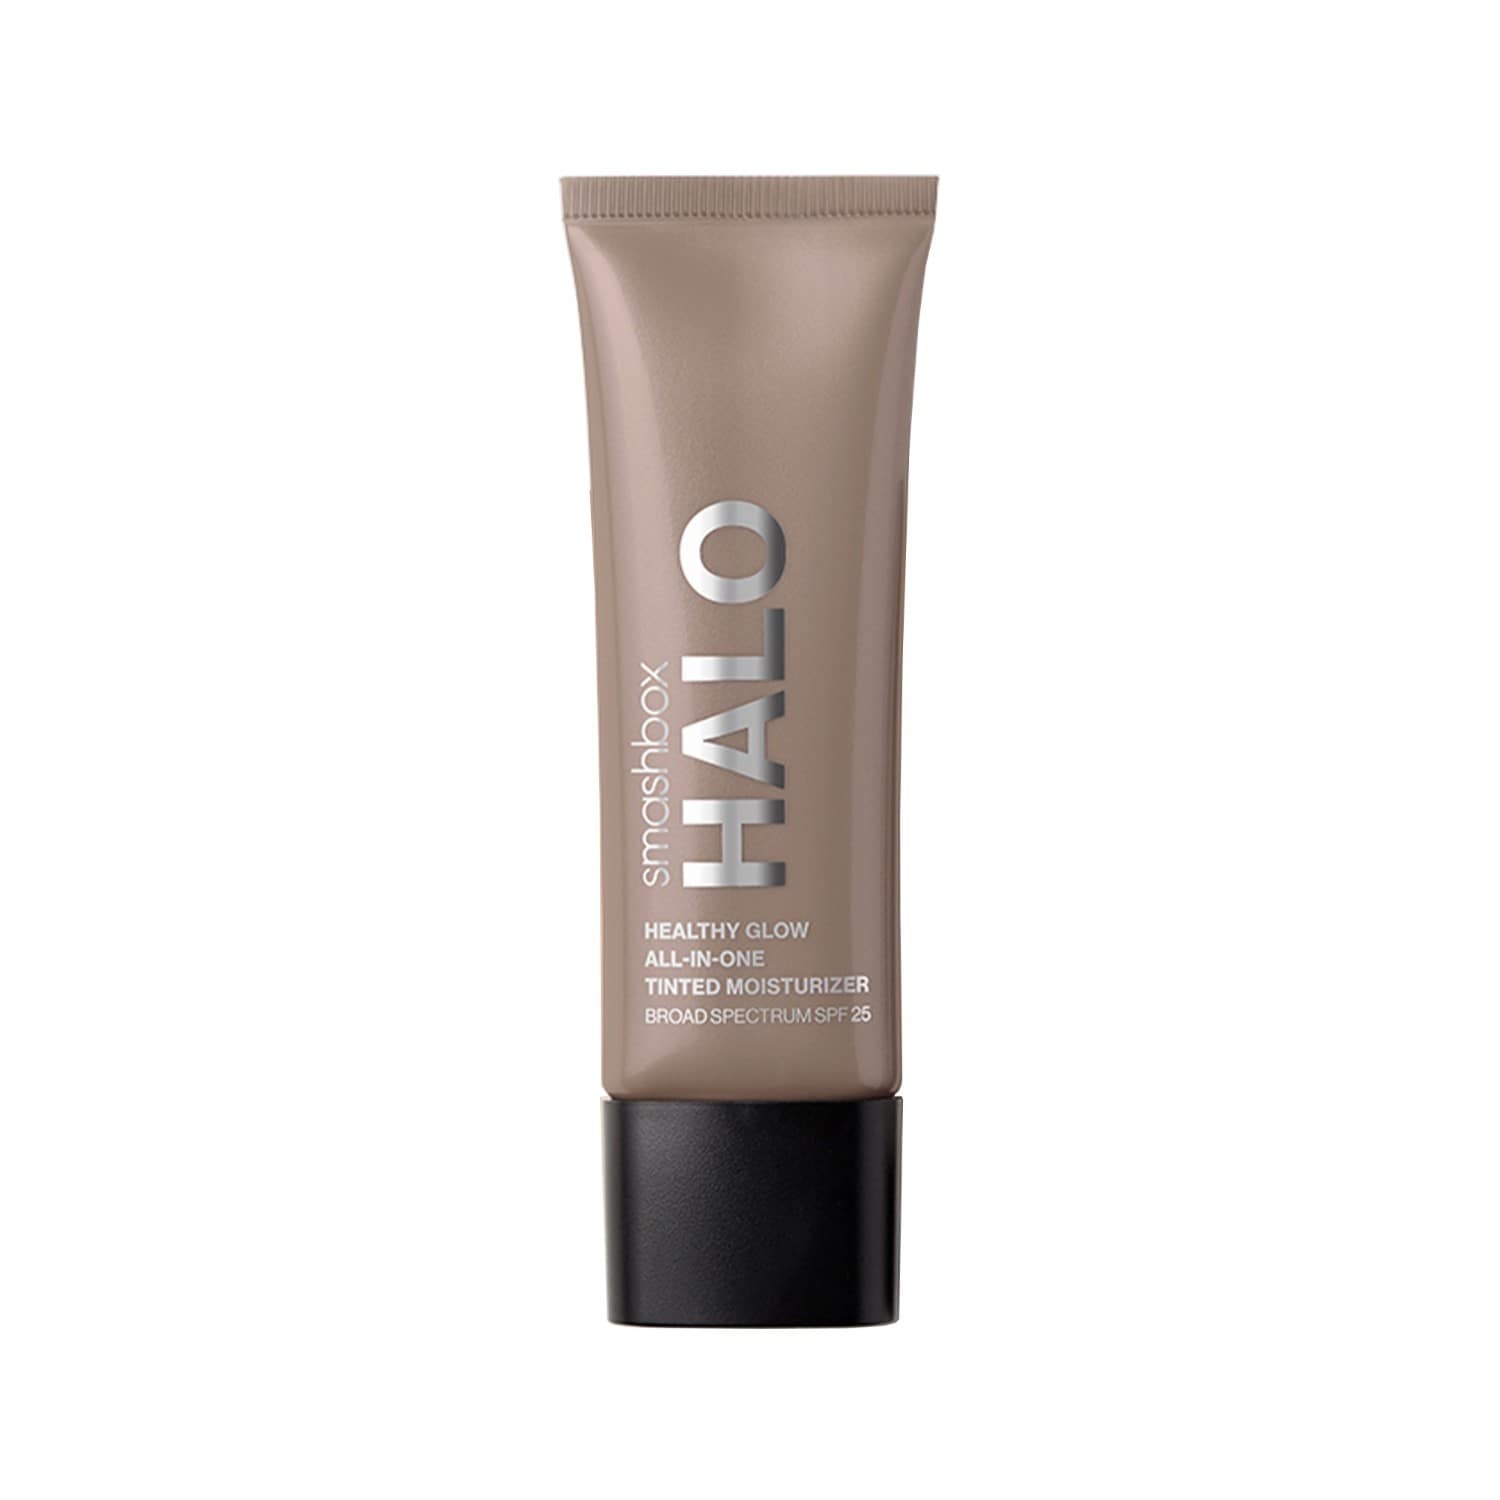 Smashbox Halo Healthy Glow All-in-One Tinted Moisturizer, Light Olive